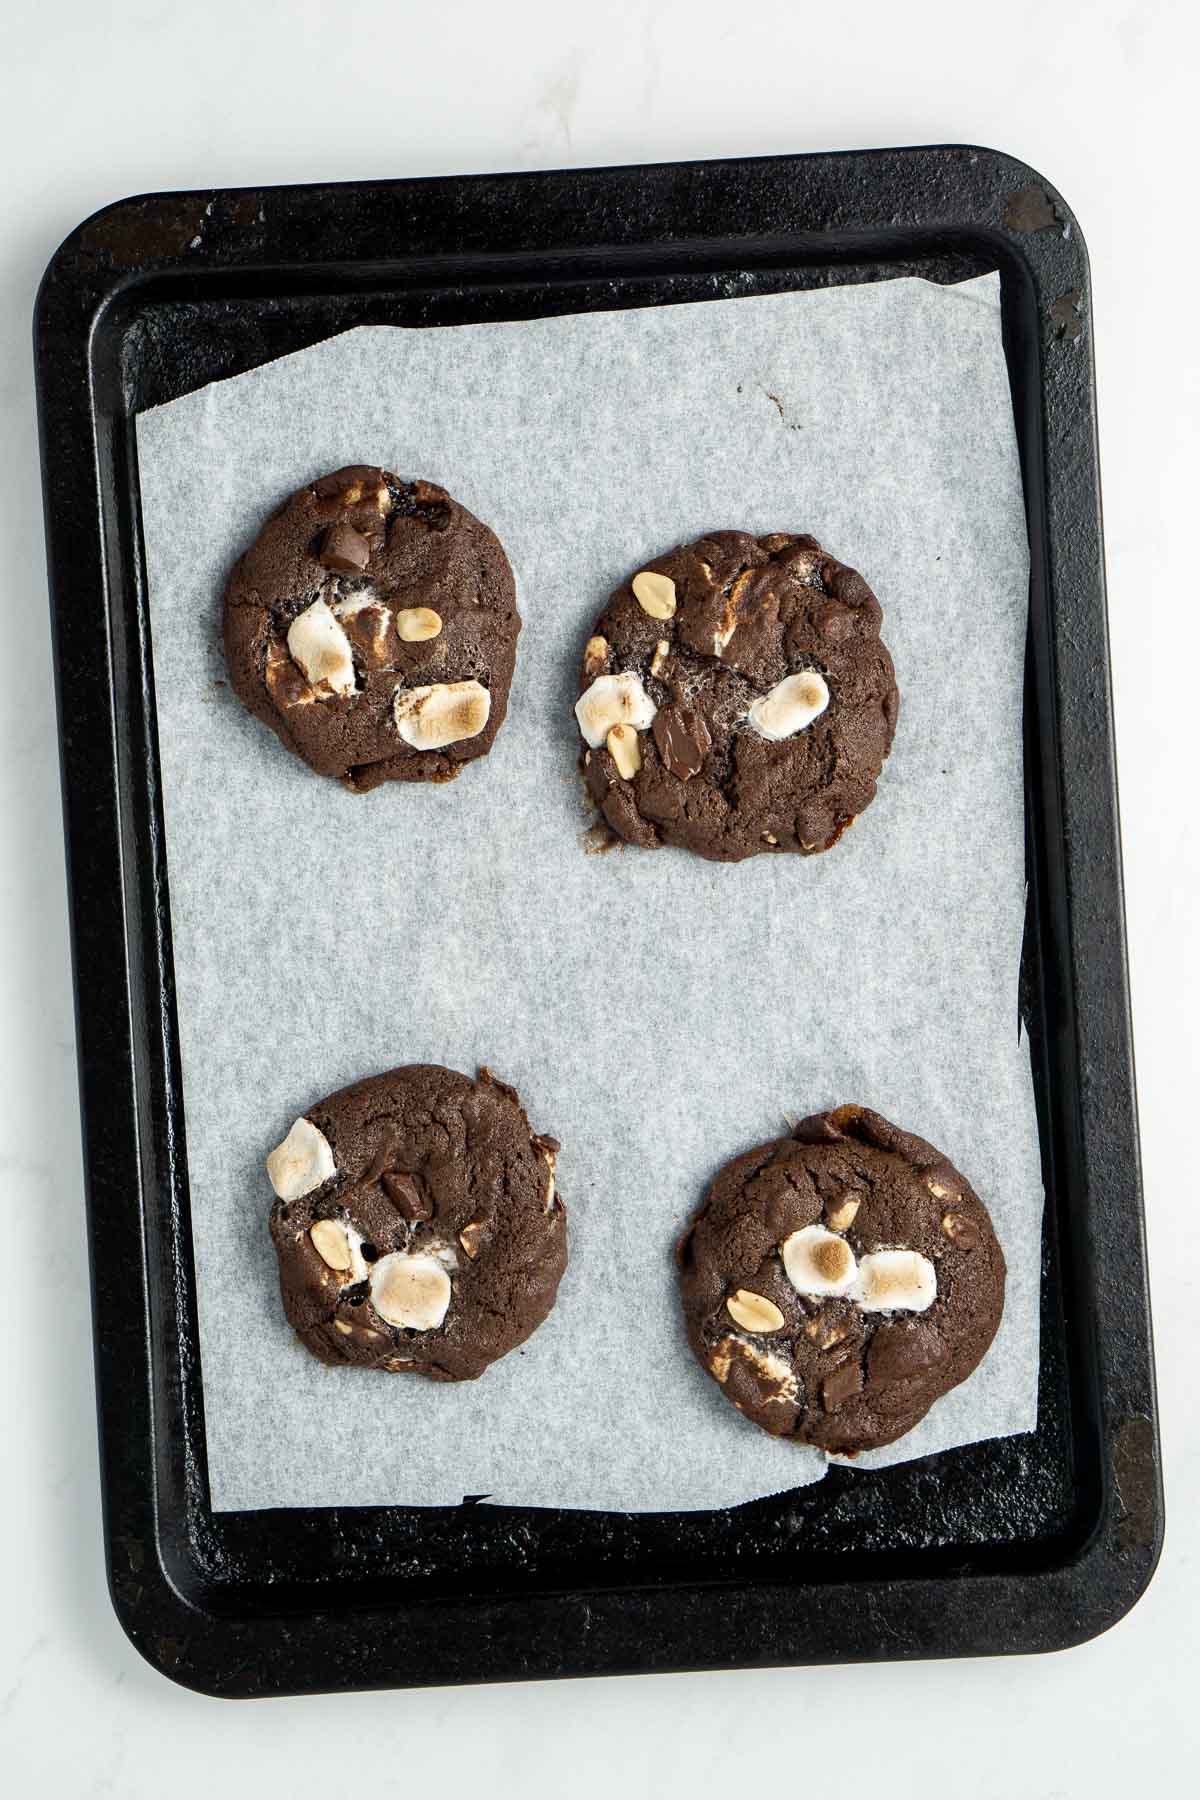 Freshly baked rocky road cookies on a baking tray.